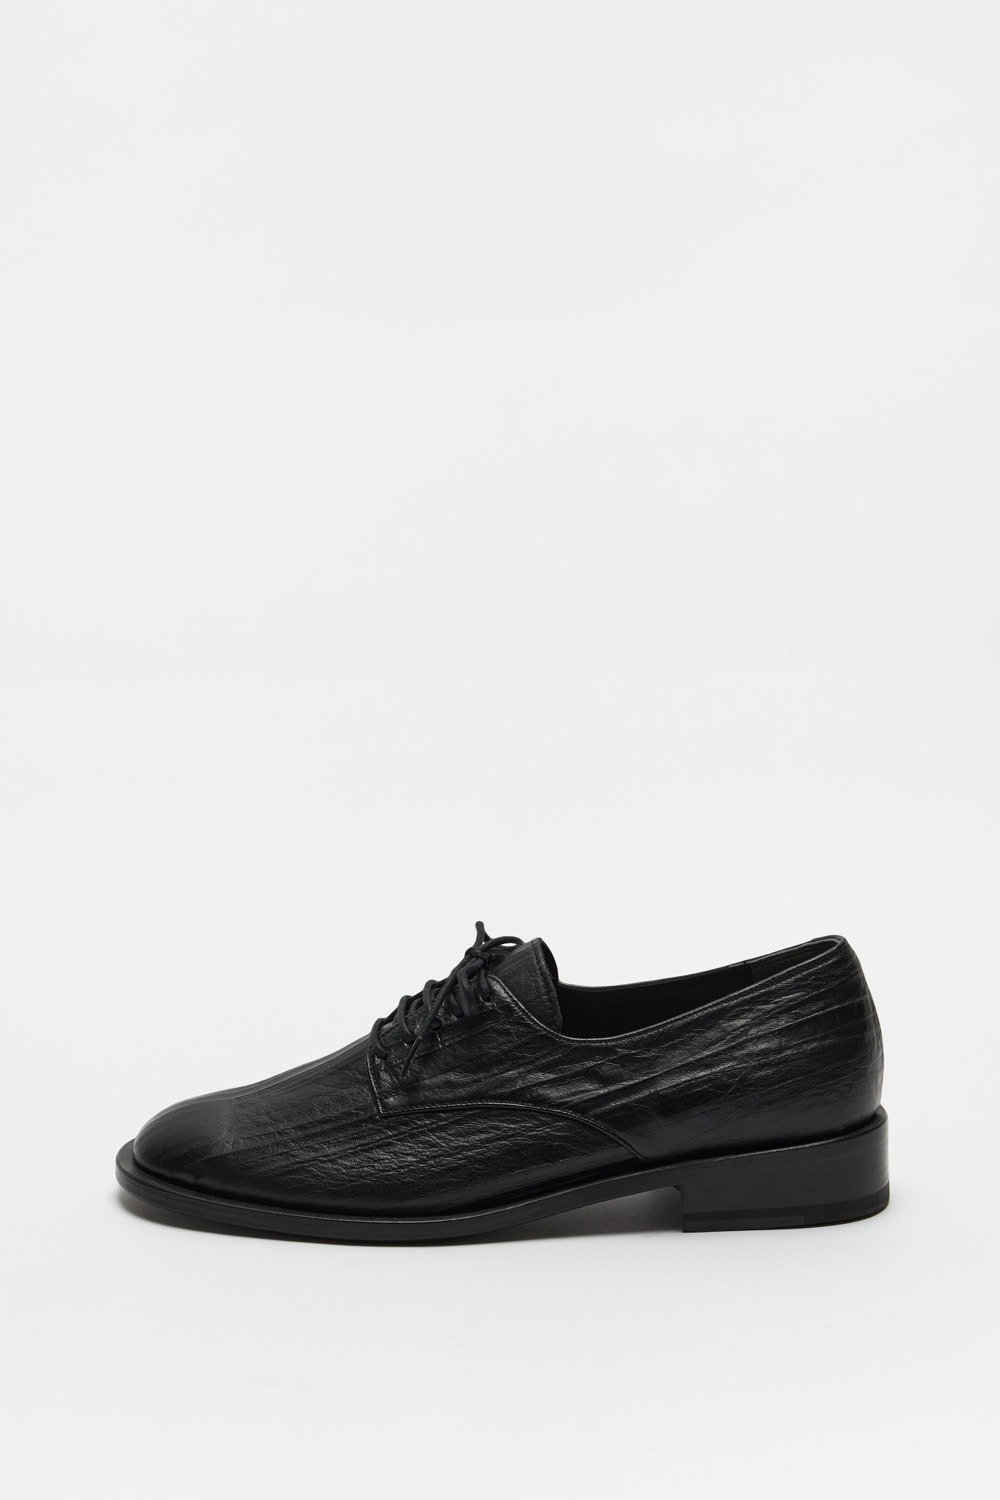 Derby Shoes (Women) - Black Creased